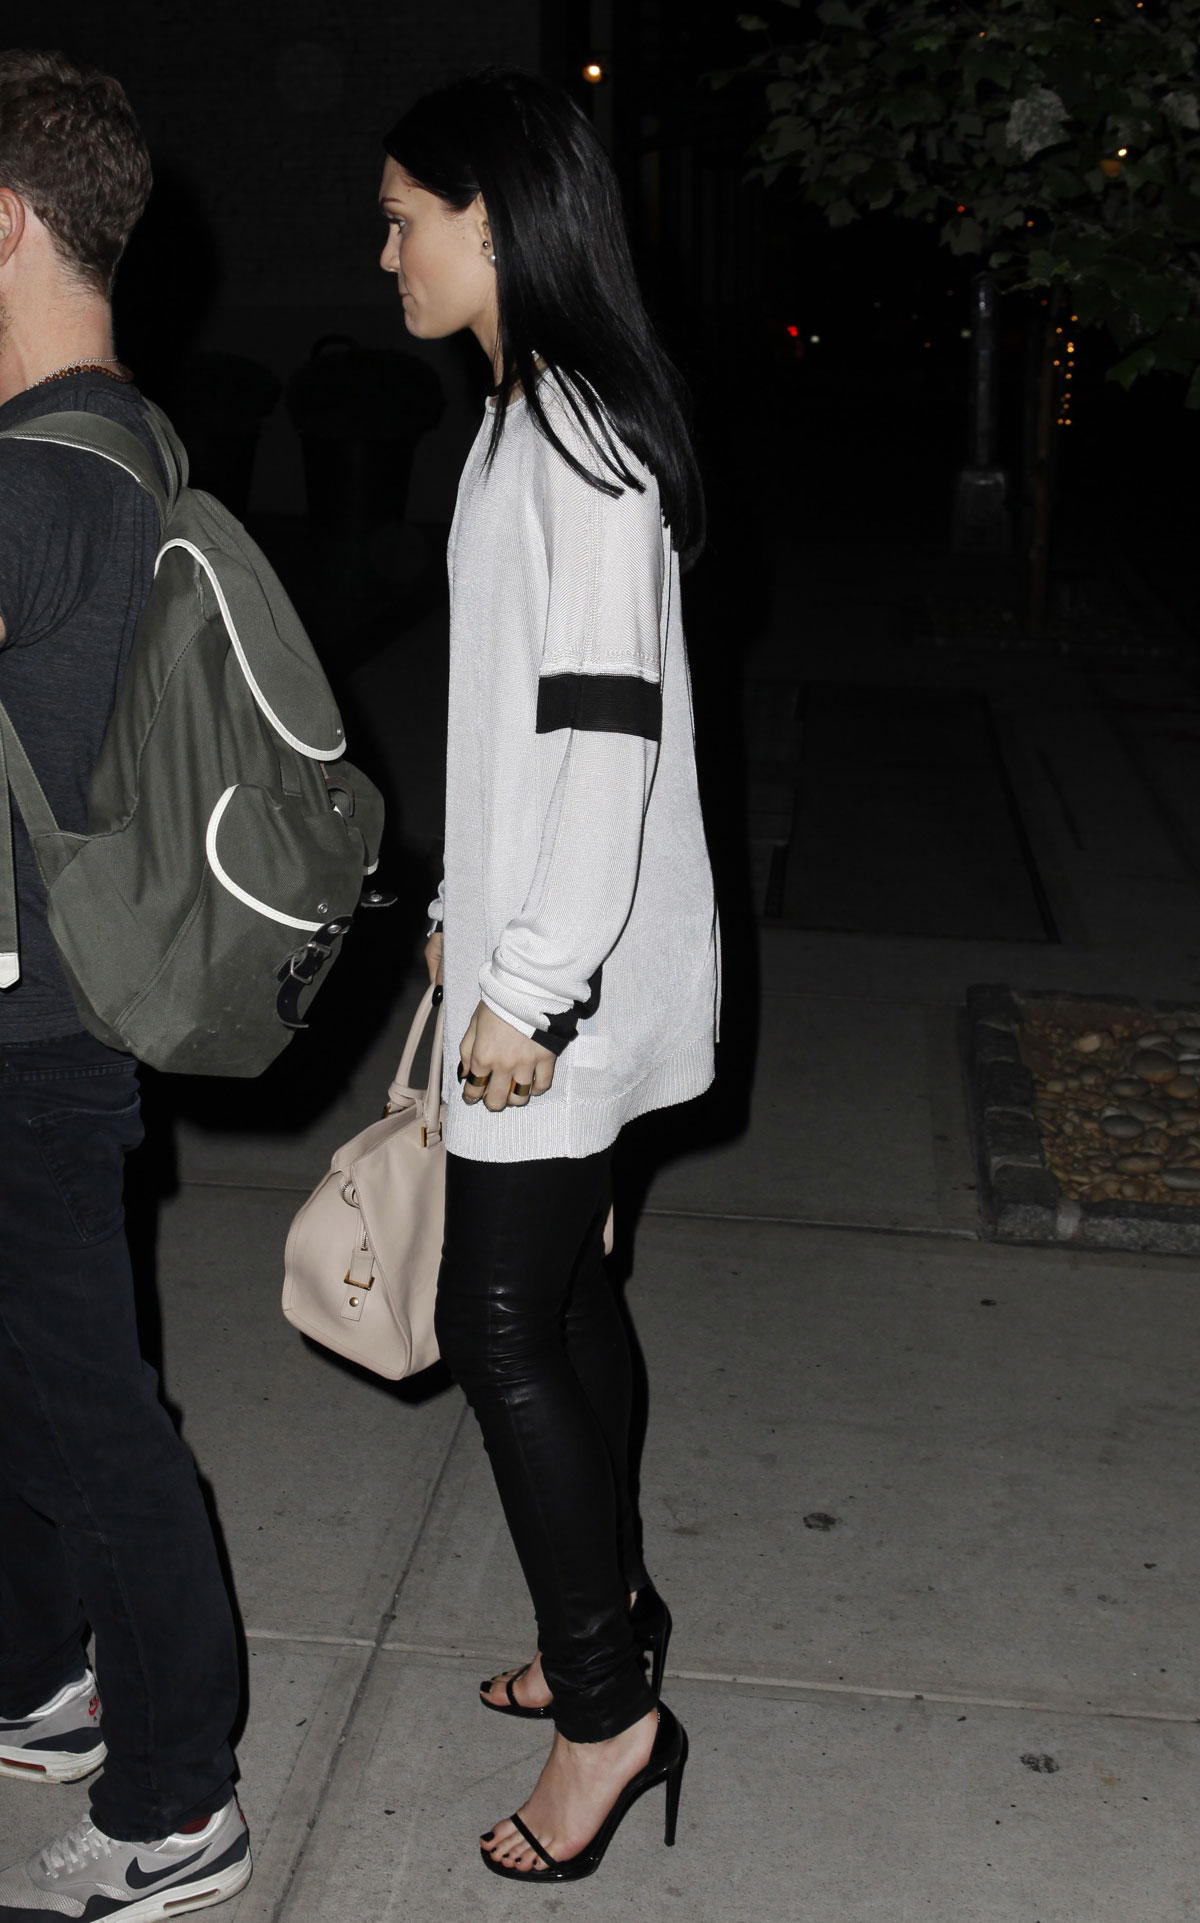 Jessie J out and about in New York City